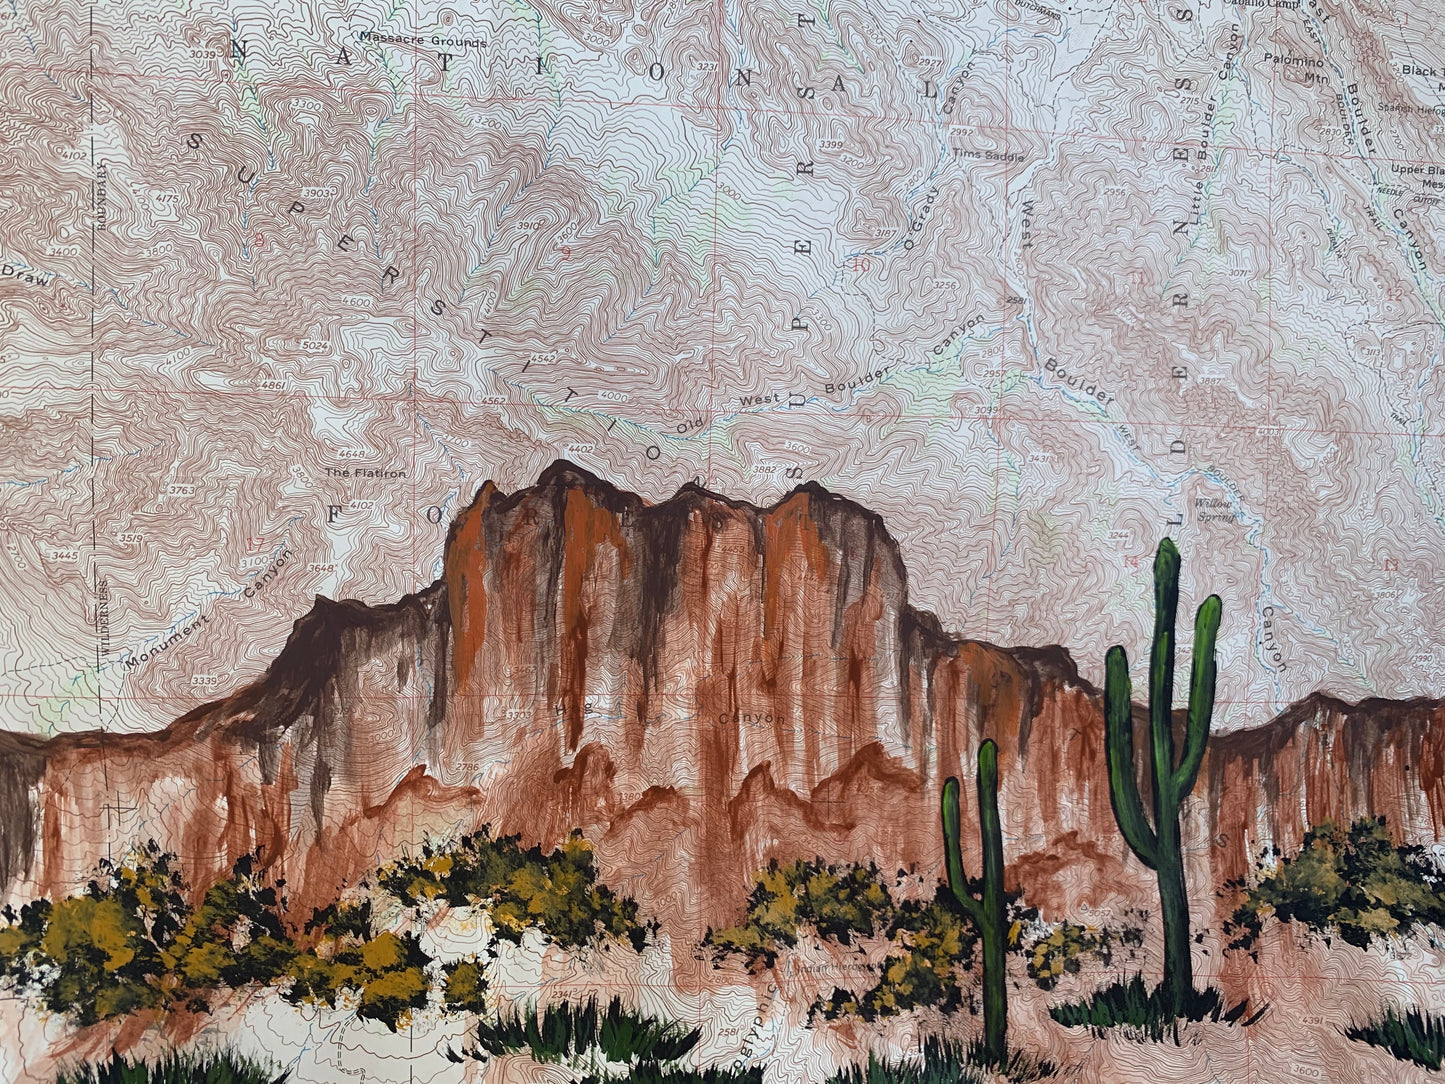 Arizona Superstition Mountains map painting